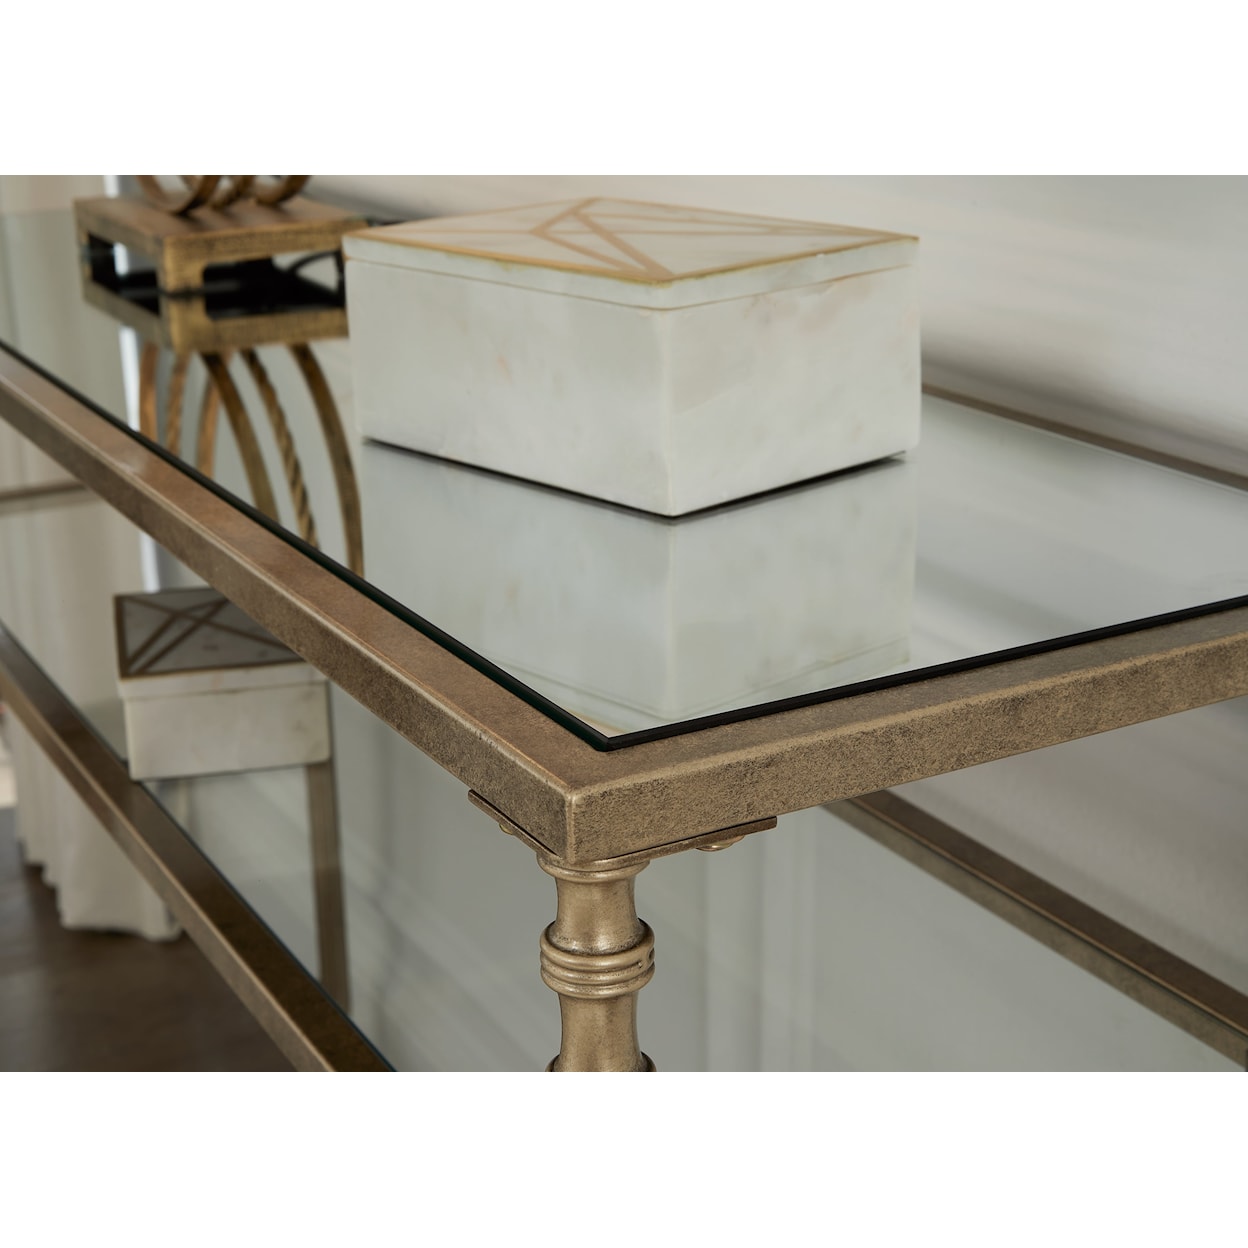 Signature Design by Ashley Cloverty Sofa Table